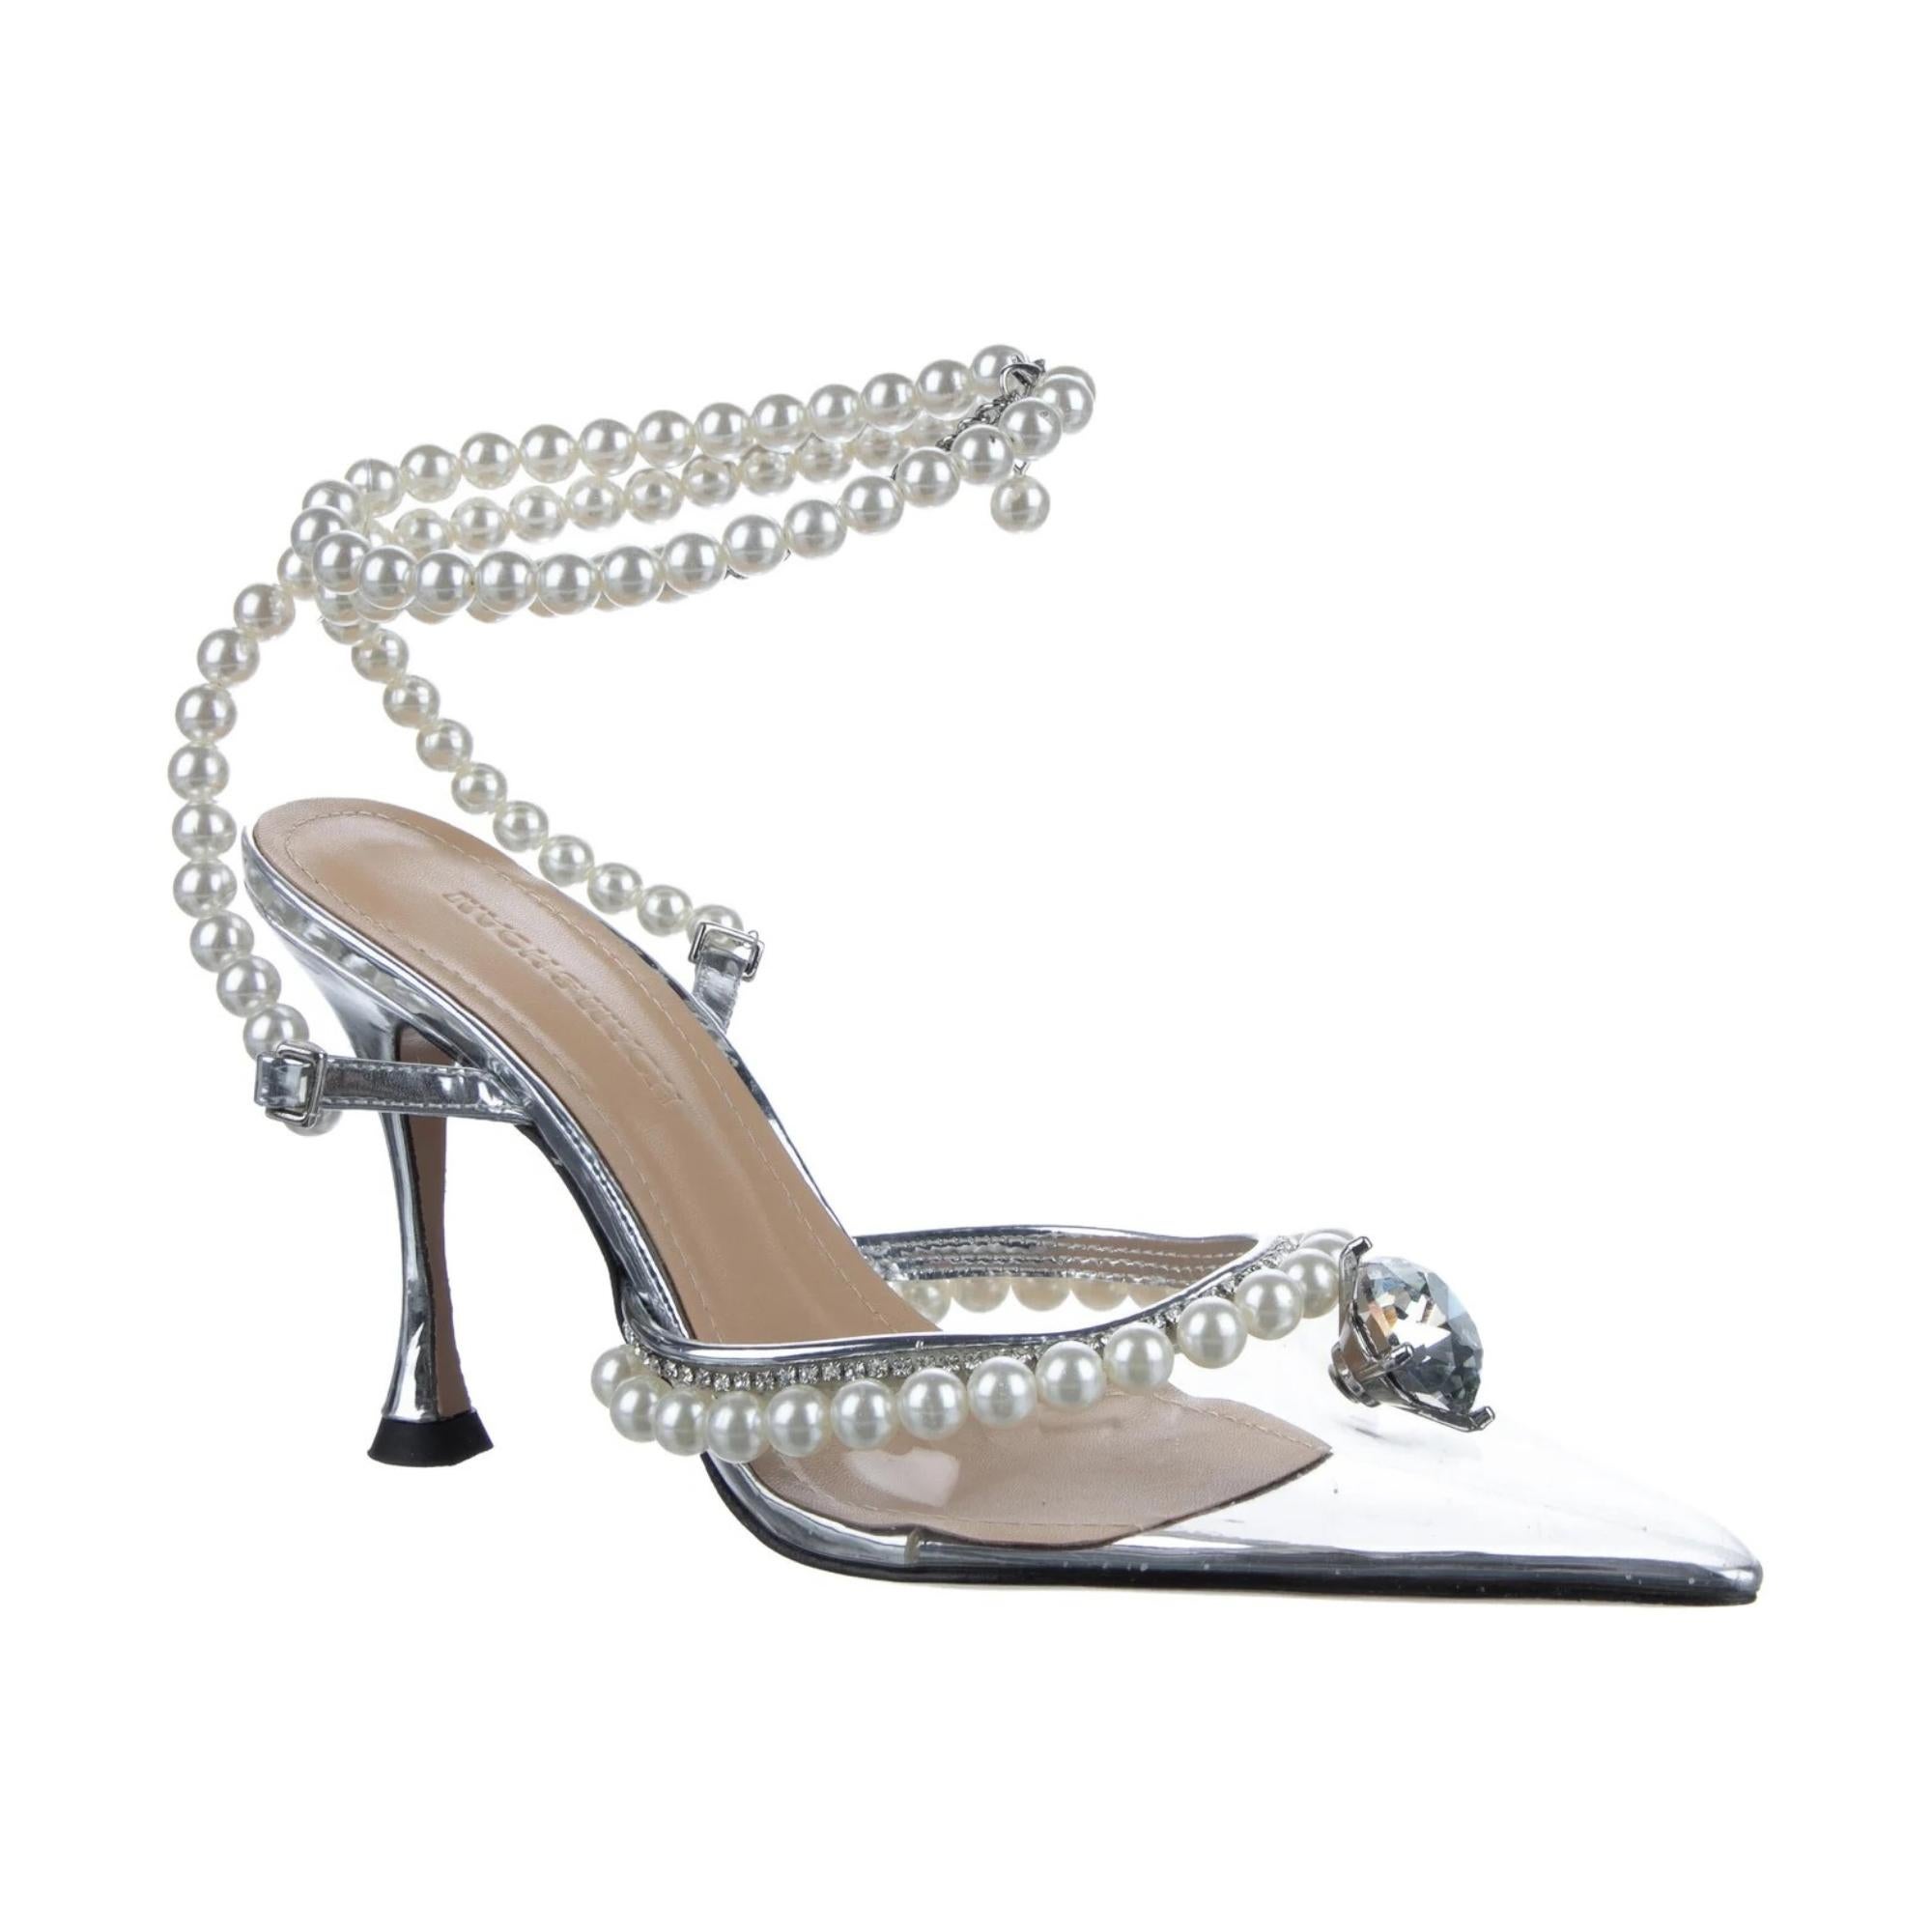 Mach & Mach PVC Slingback Pumps. Silver & Clear. Beaded & Crystal Accents. Pointed-Toes. Block Heels. Wrap-Around Straps & Buckle Closure at Ankles.

COLOR: Silver & Clear
MATERIAL: PVC, strass
SIZE: 8 US
HEEL HEIGHT: 110 mm / 4.25”
CONDITION: Very